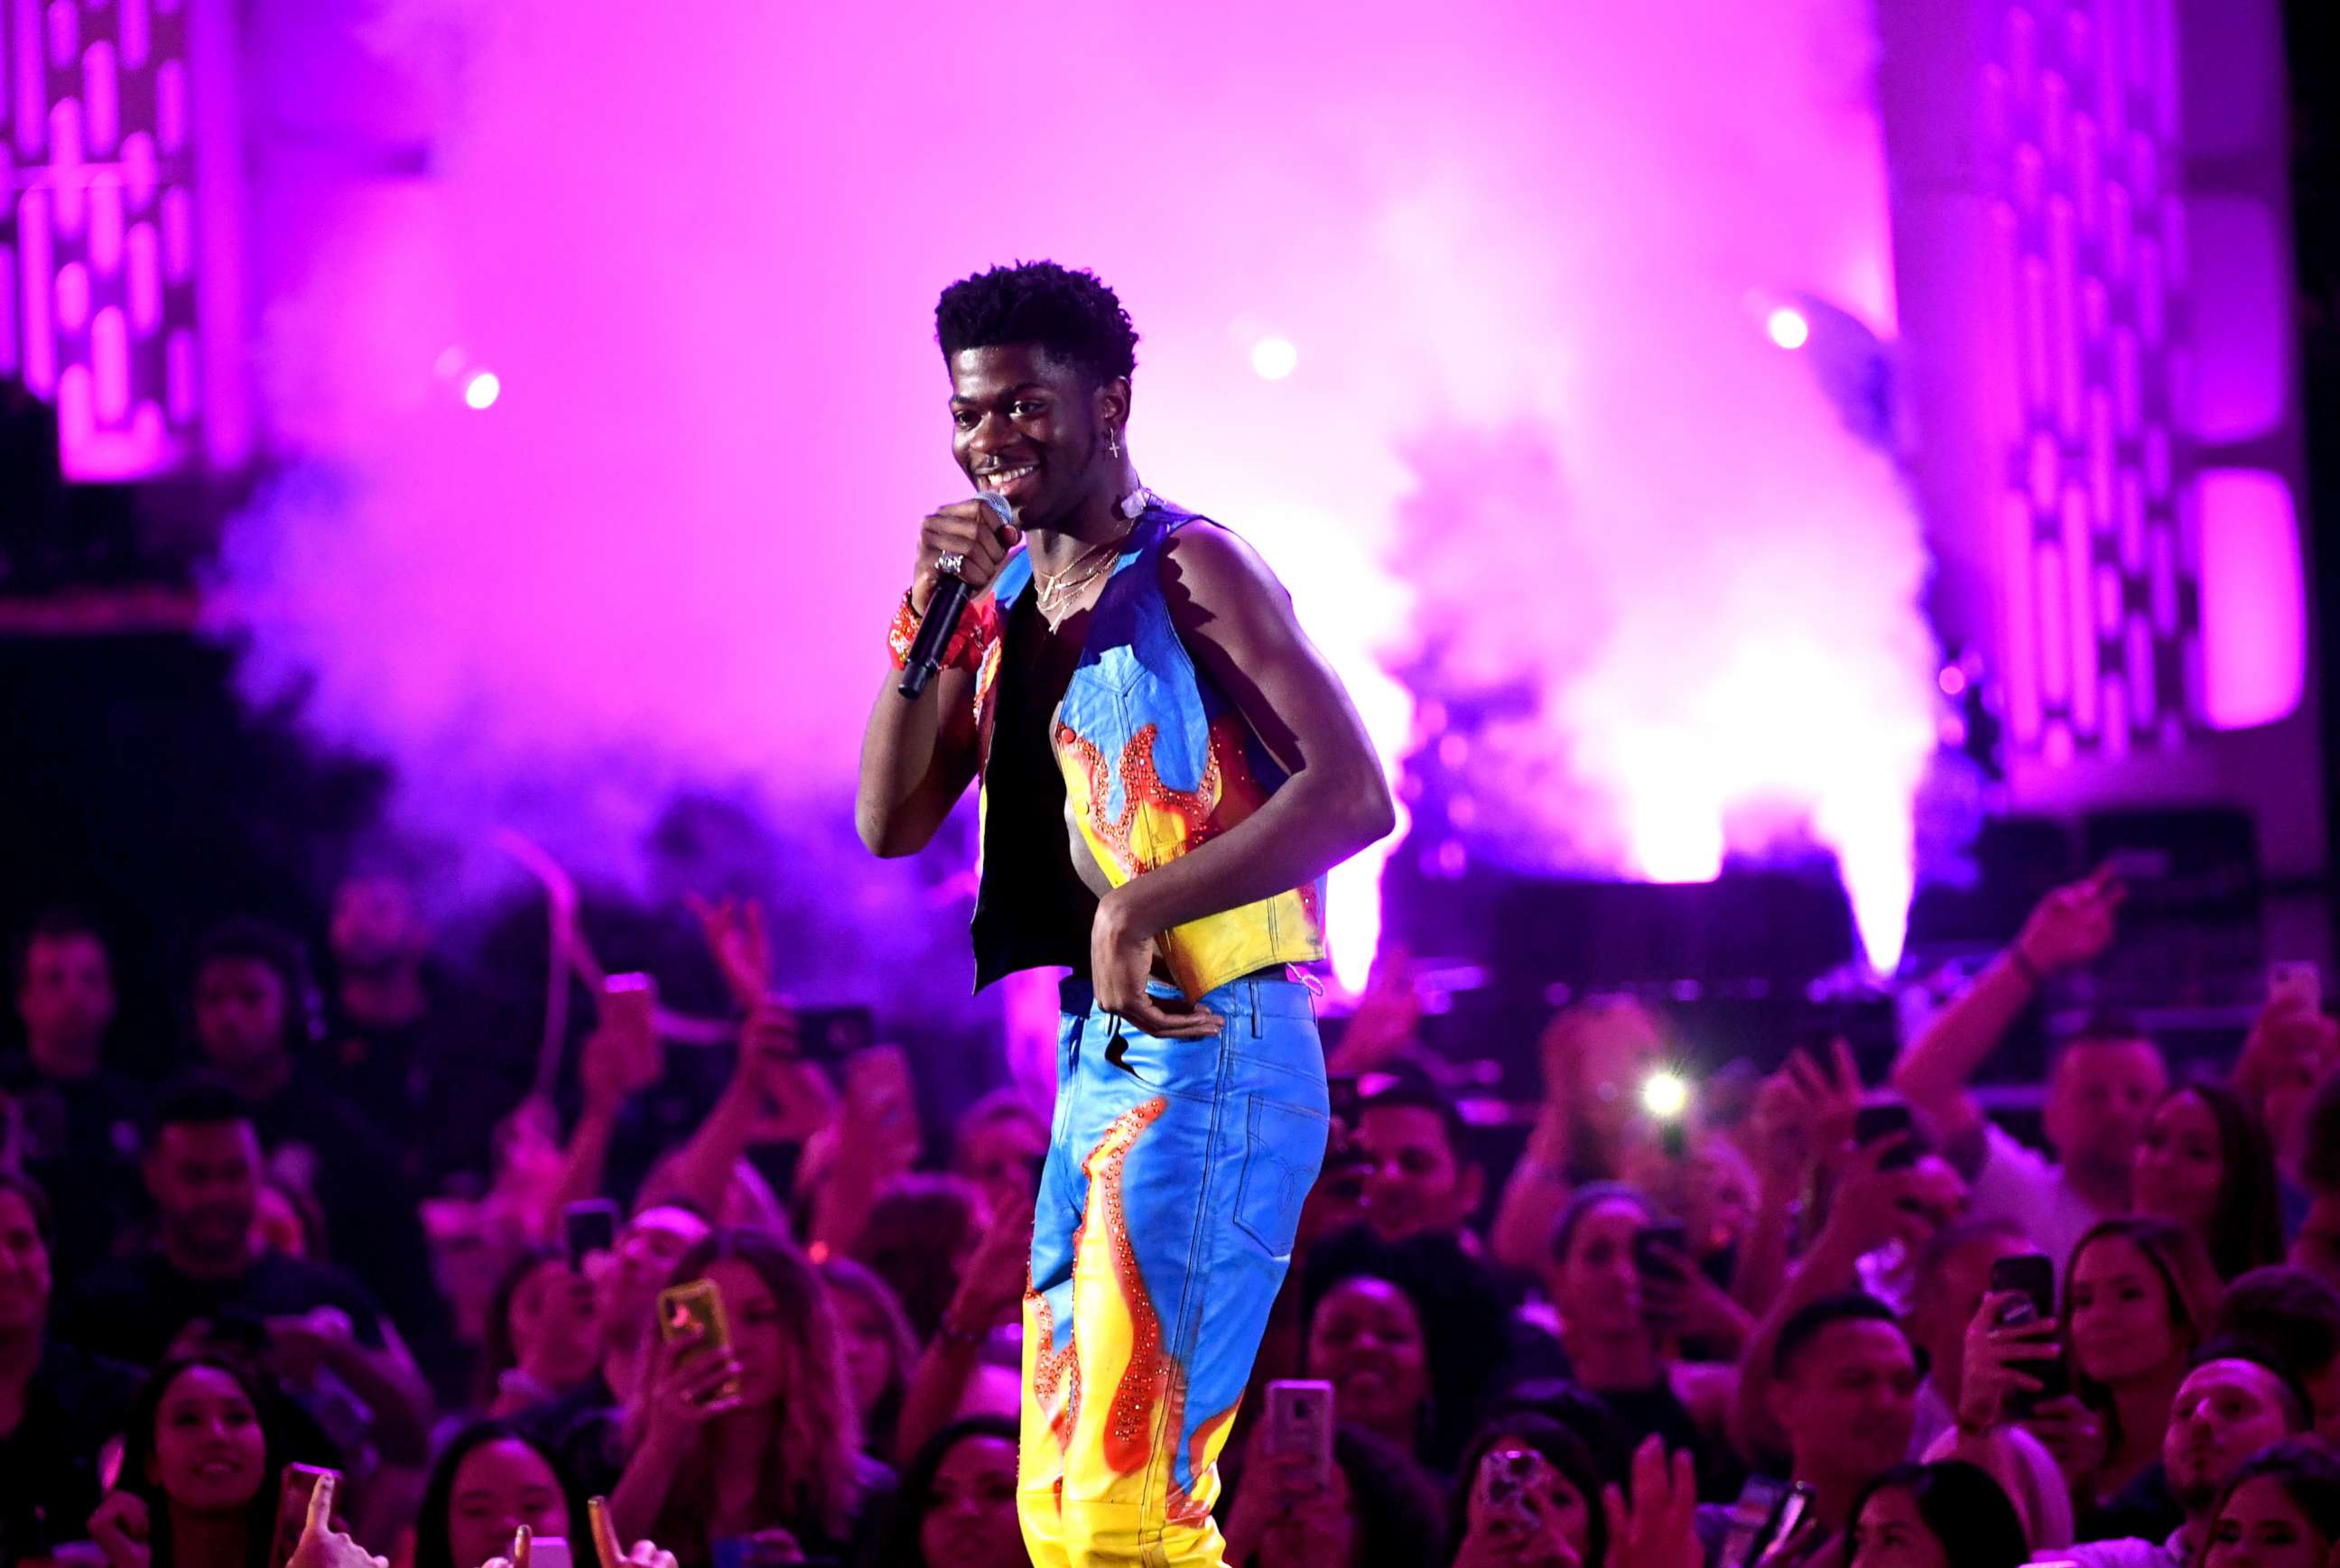 PHOTO: Lil Nas X performs onstage during the 2019 iHeartRadio Music Festival at T-Mobile Arena on September 20, 2019 in Las Vegas, Nevada.